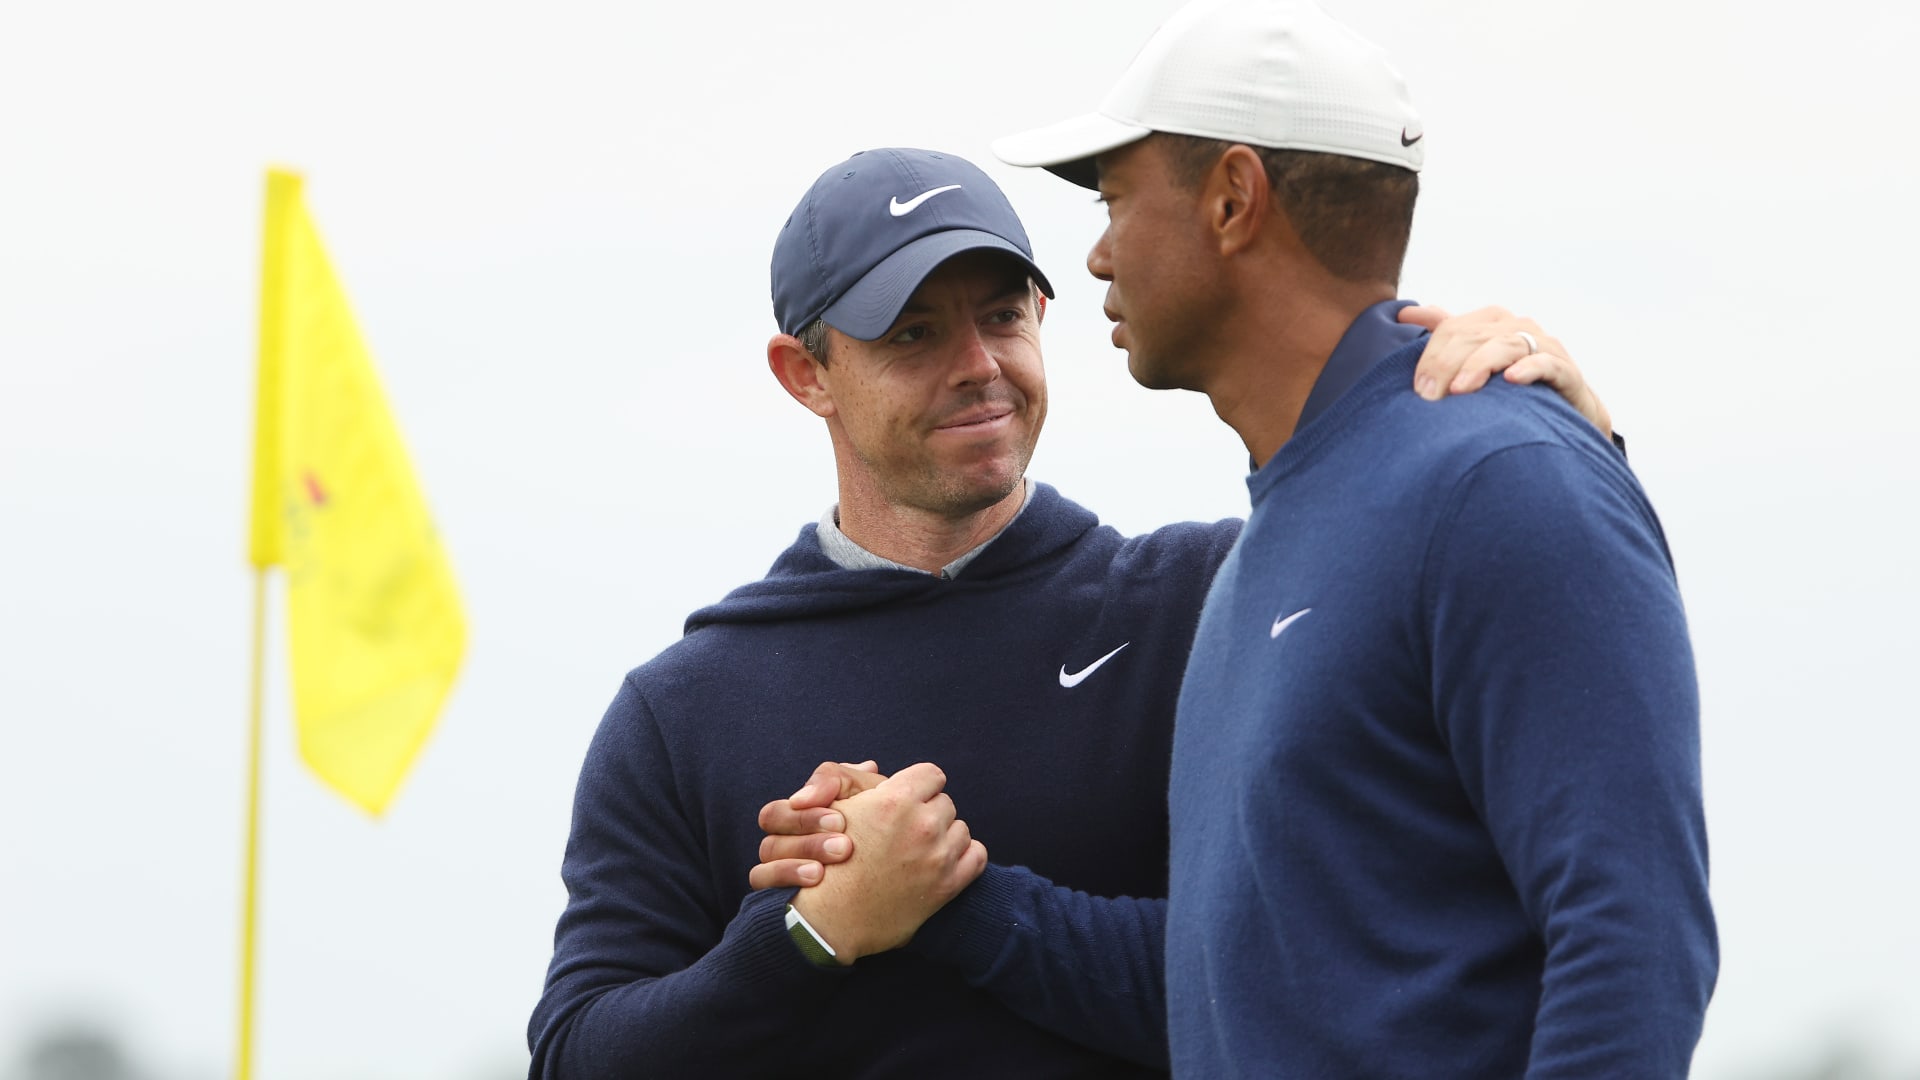 The Tiger Woods and Rory McIlroy TGL Golf League will be broadcast on ESPN